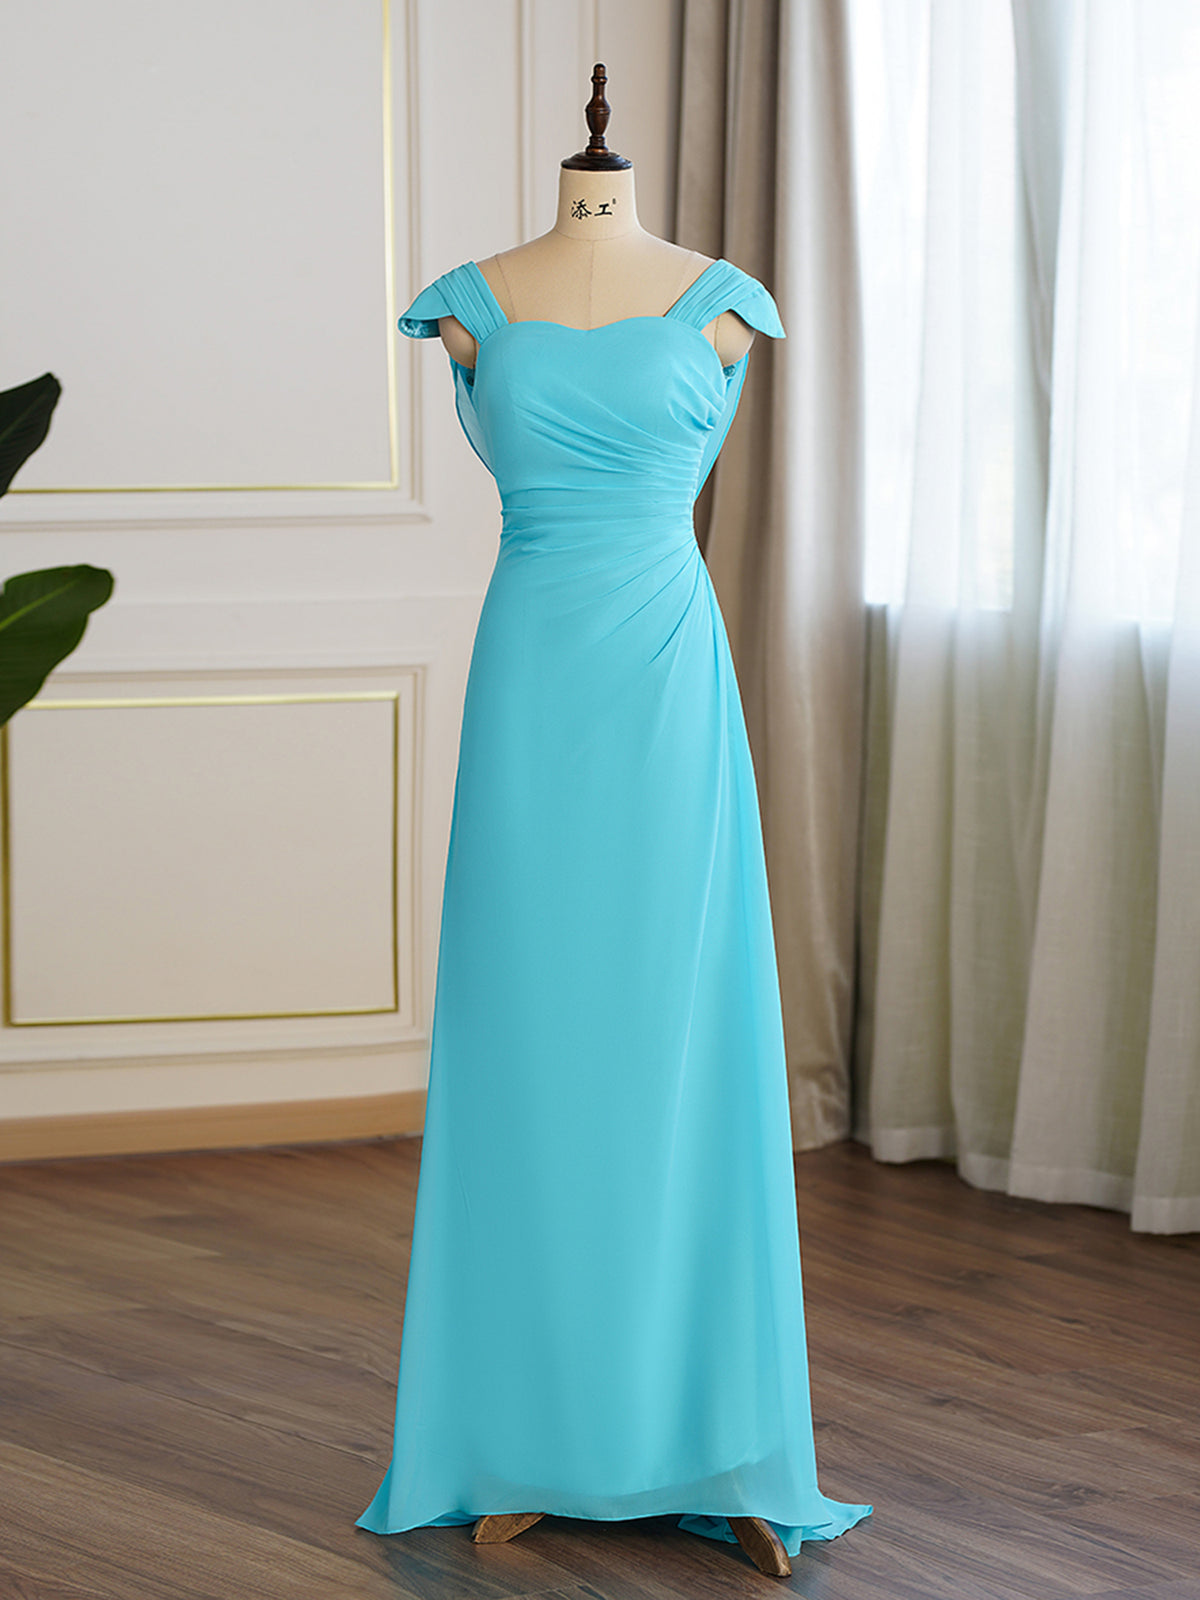 Simple Pool Blue Queen Anne Aline Bridesmaid Dress As Picture